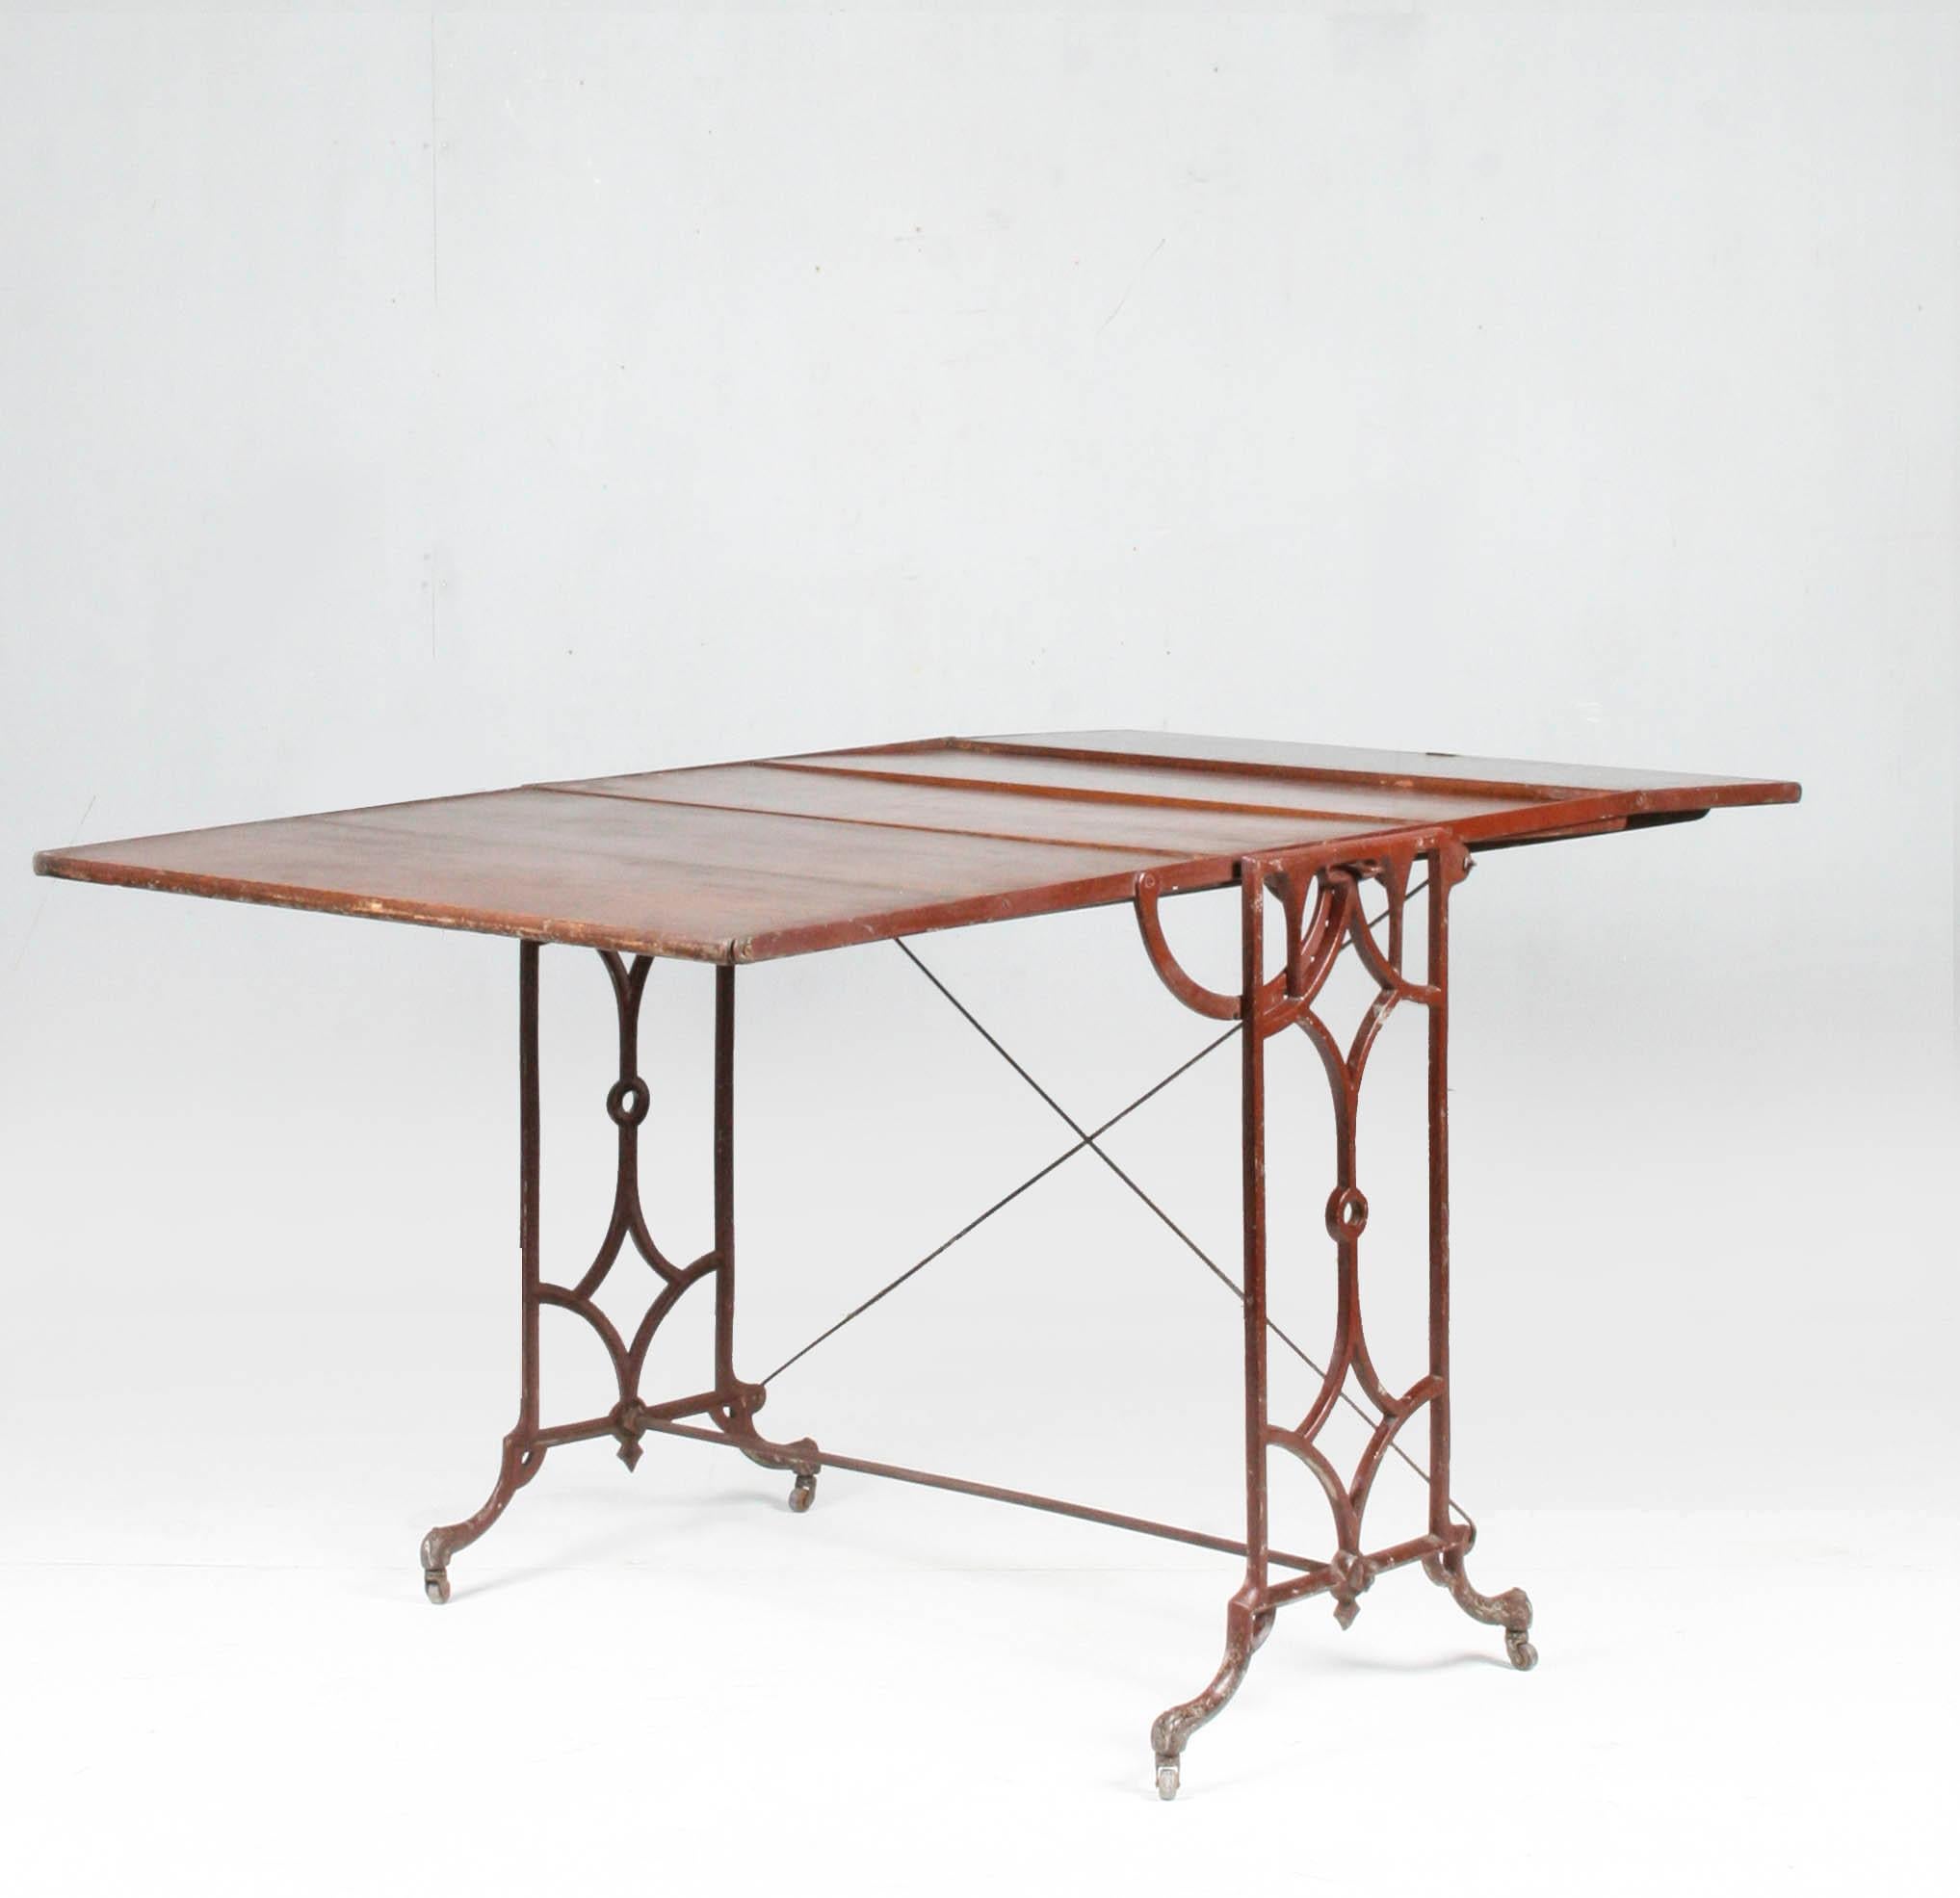 Canadian Antique Folding Shelf / Table, Boeckh Brothers, Canada